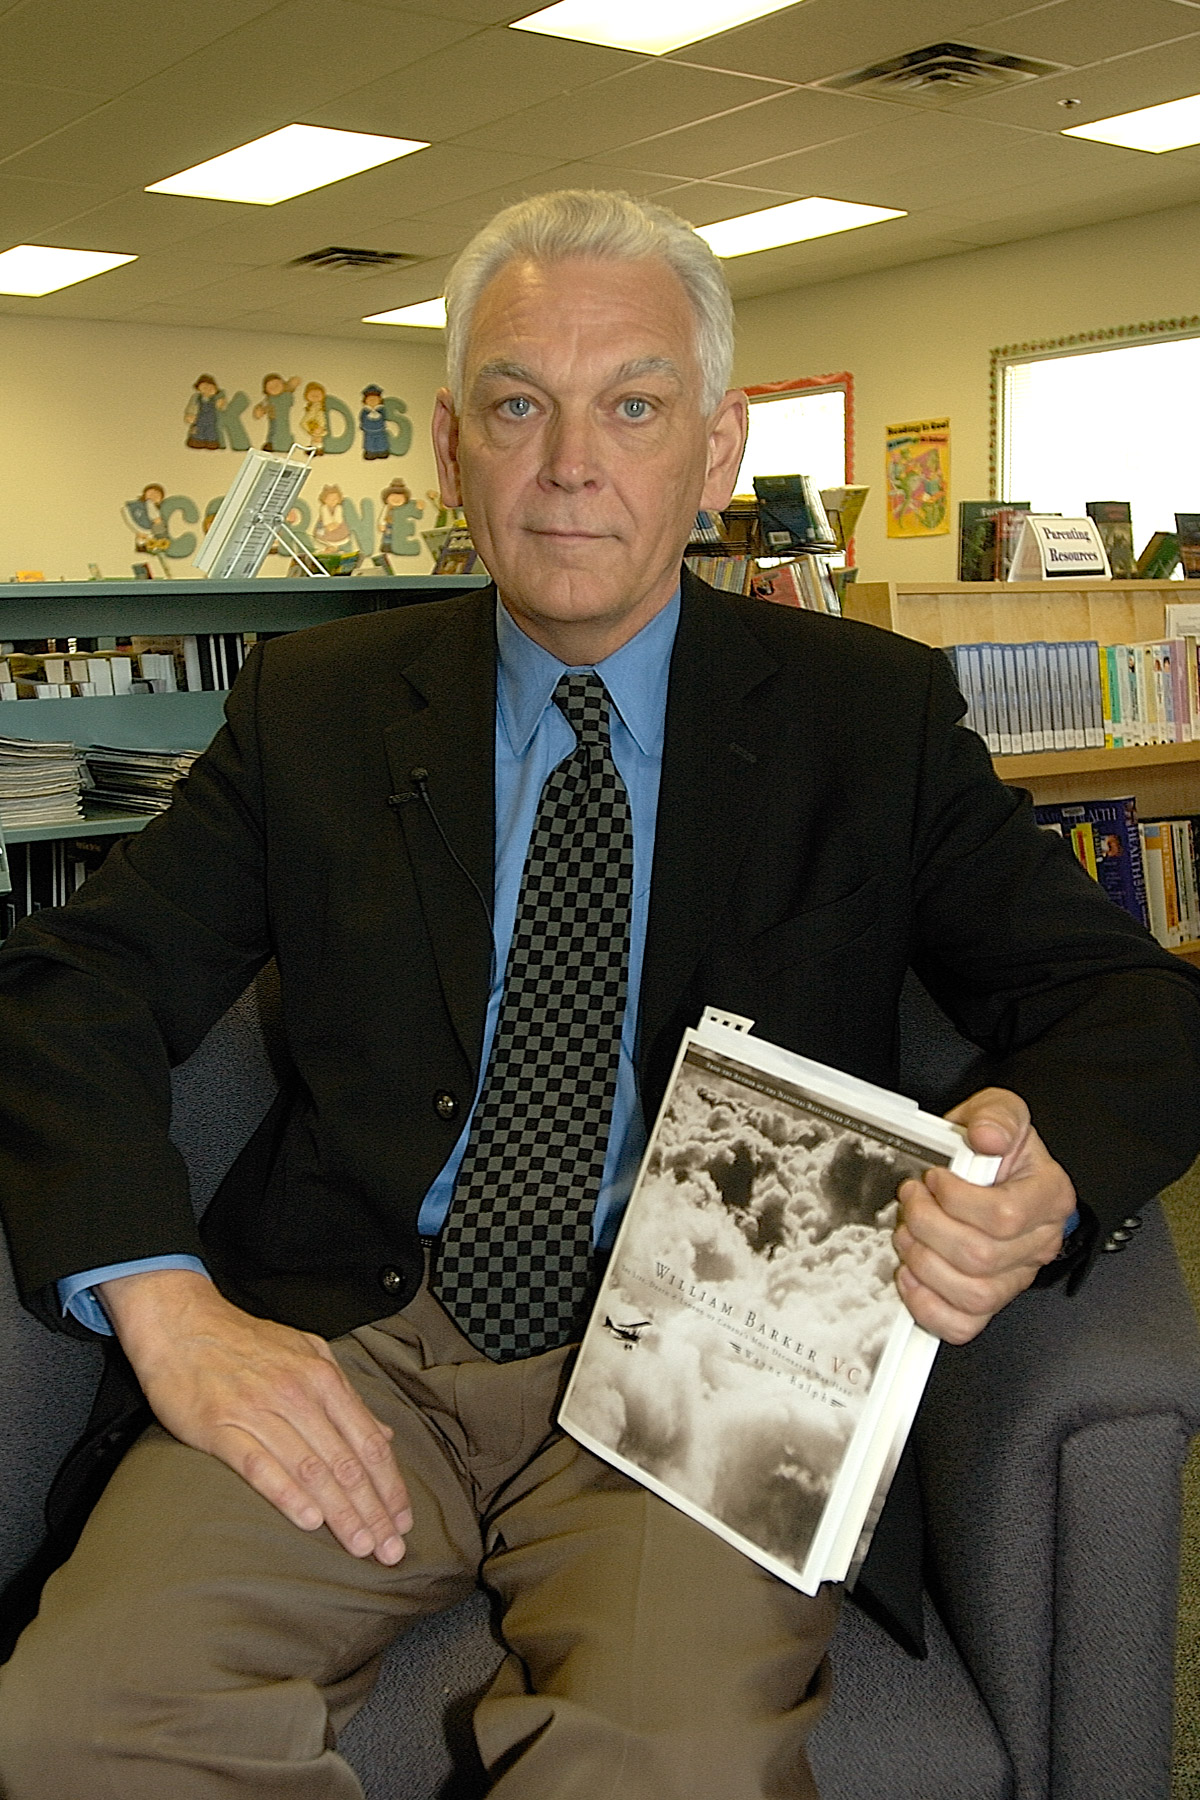 Author Wayne Ralph with his definitive biography “Barker VC: The Life, Death and Legend of Canada’s Most Decorated War Hero”, originally published in 1997, republished in a new illustrated edition in 2007. PHOTO: Master Corporal Peter Simpson, LE2007-0149